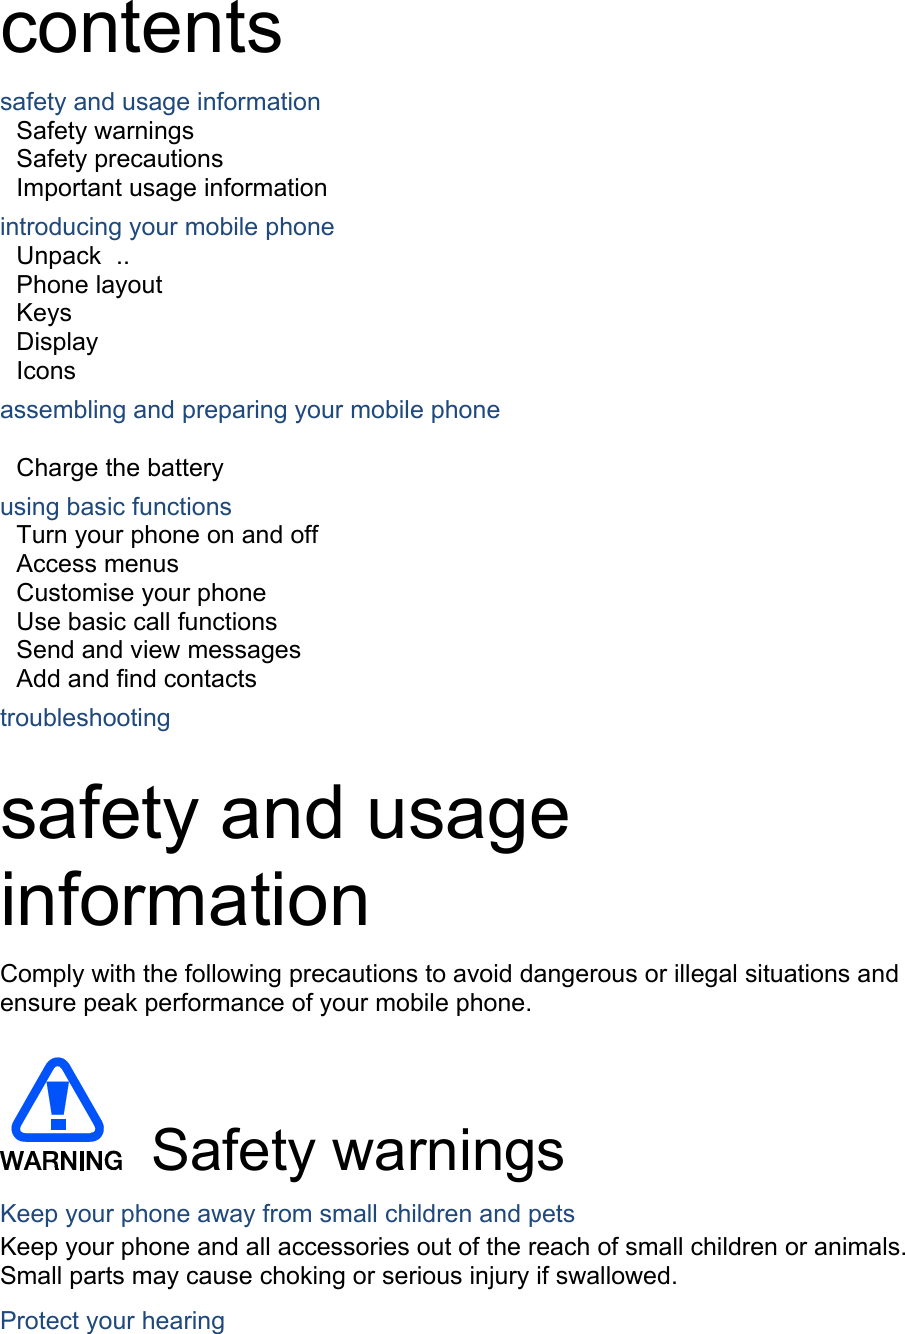  contents safety and usage information     Safety warnings     Safety precautions     Important usage information     introducing your mobile phone     Unpack  ..  Phone layout     Keys  Display  Icons assembling and preparing your mobile phone          Charge the battery     using basic functions    Turn your phone on and off    Access menus     Customise your phone     Use basic call functions     Send and view messages     Add and find contacts     troubleshooting     safety and usage information  Comply with the following precautions to avoid dangerous or illegal situations and ensure peak performance of your mobile phone.   Safety warnings Keep your phone away from small children and pets Keep your phone and all accessories out of the reach of small children or animals. Small parts may cause choking or serious injury if swallowed. Protect your hearing 